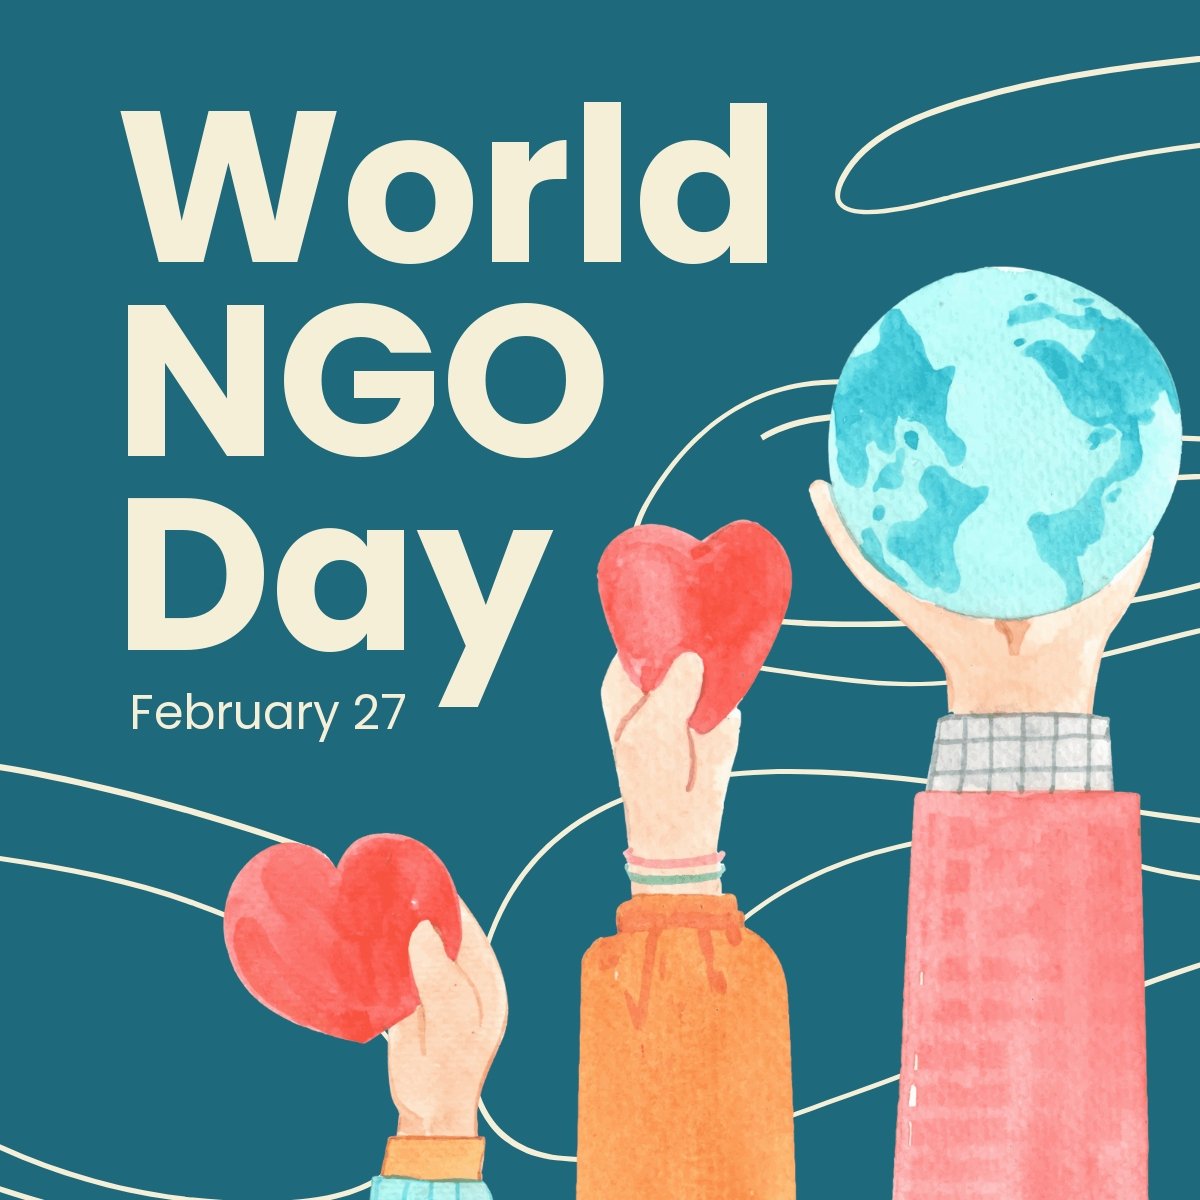 FREE World NGO Day Templates & Examples Edit Online & Download